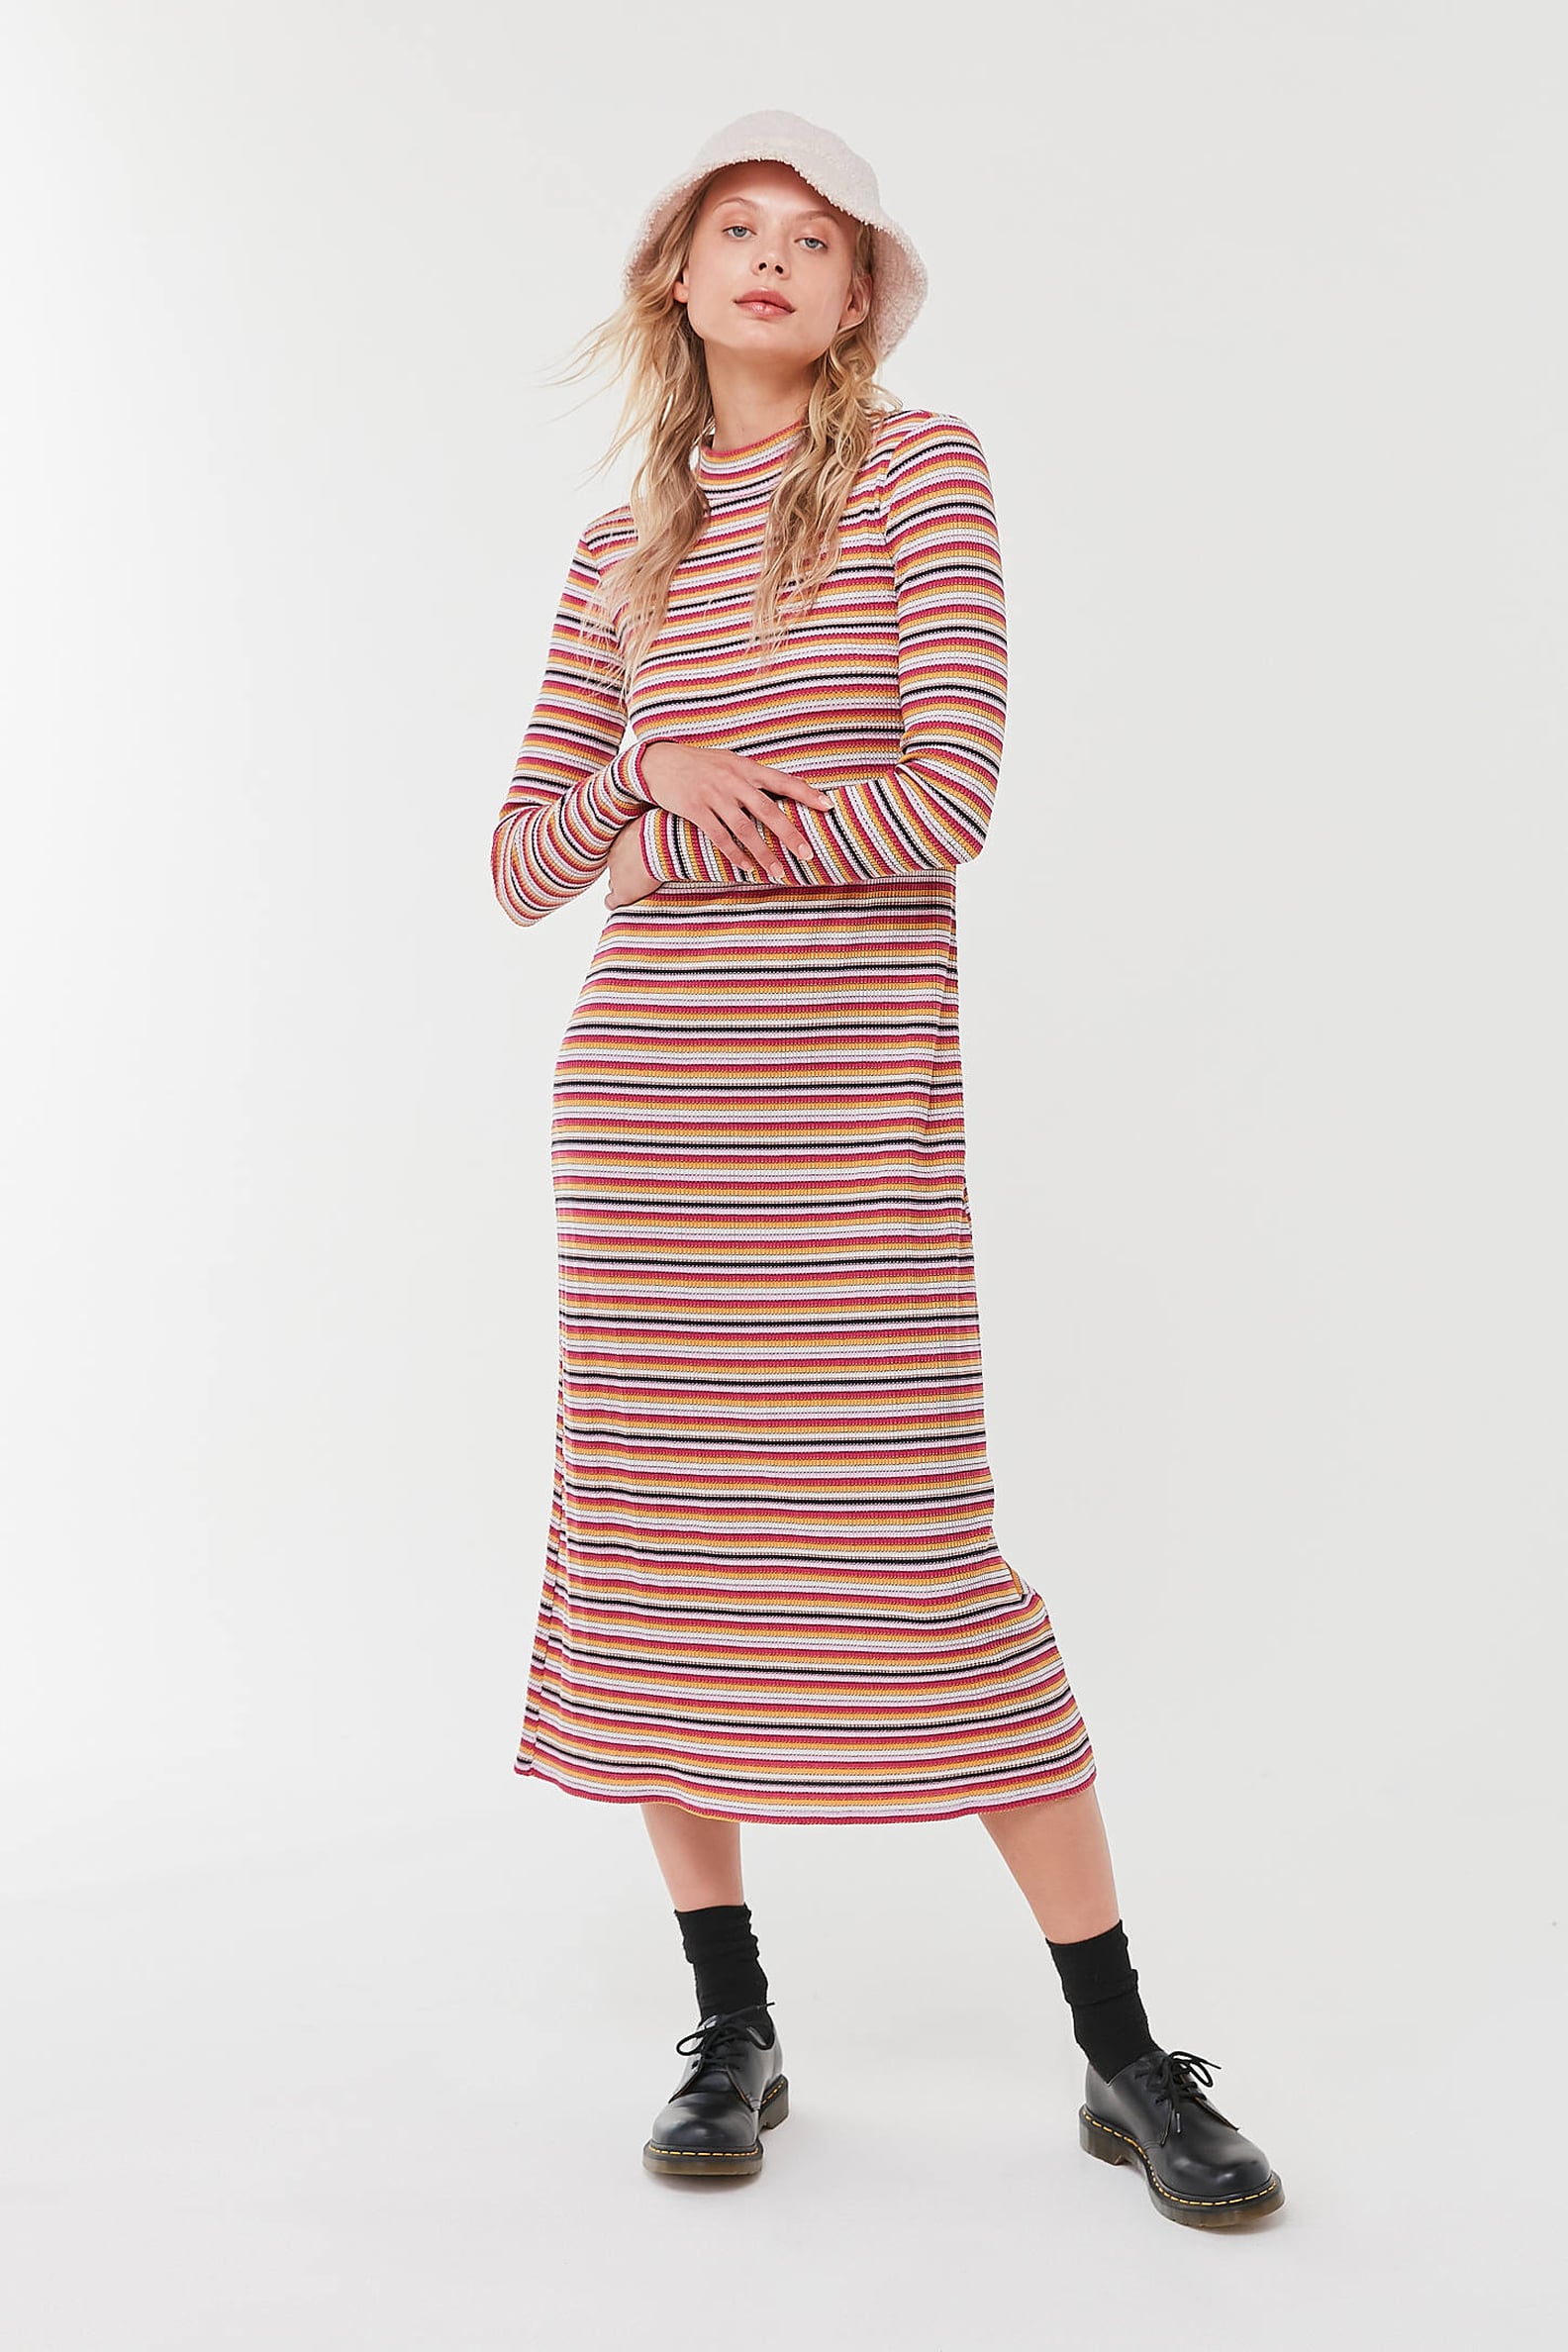 Stylish Long-Sleeved Dresses That Are Perfect For Fall | POPSUGAR Fashion